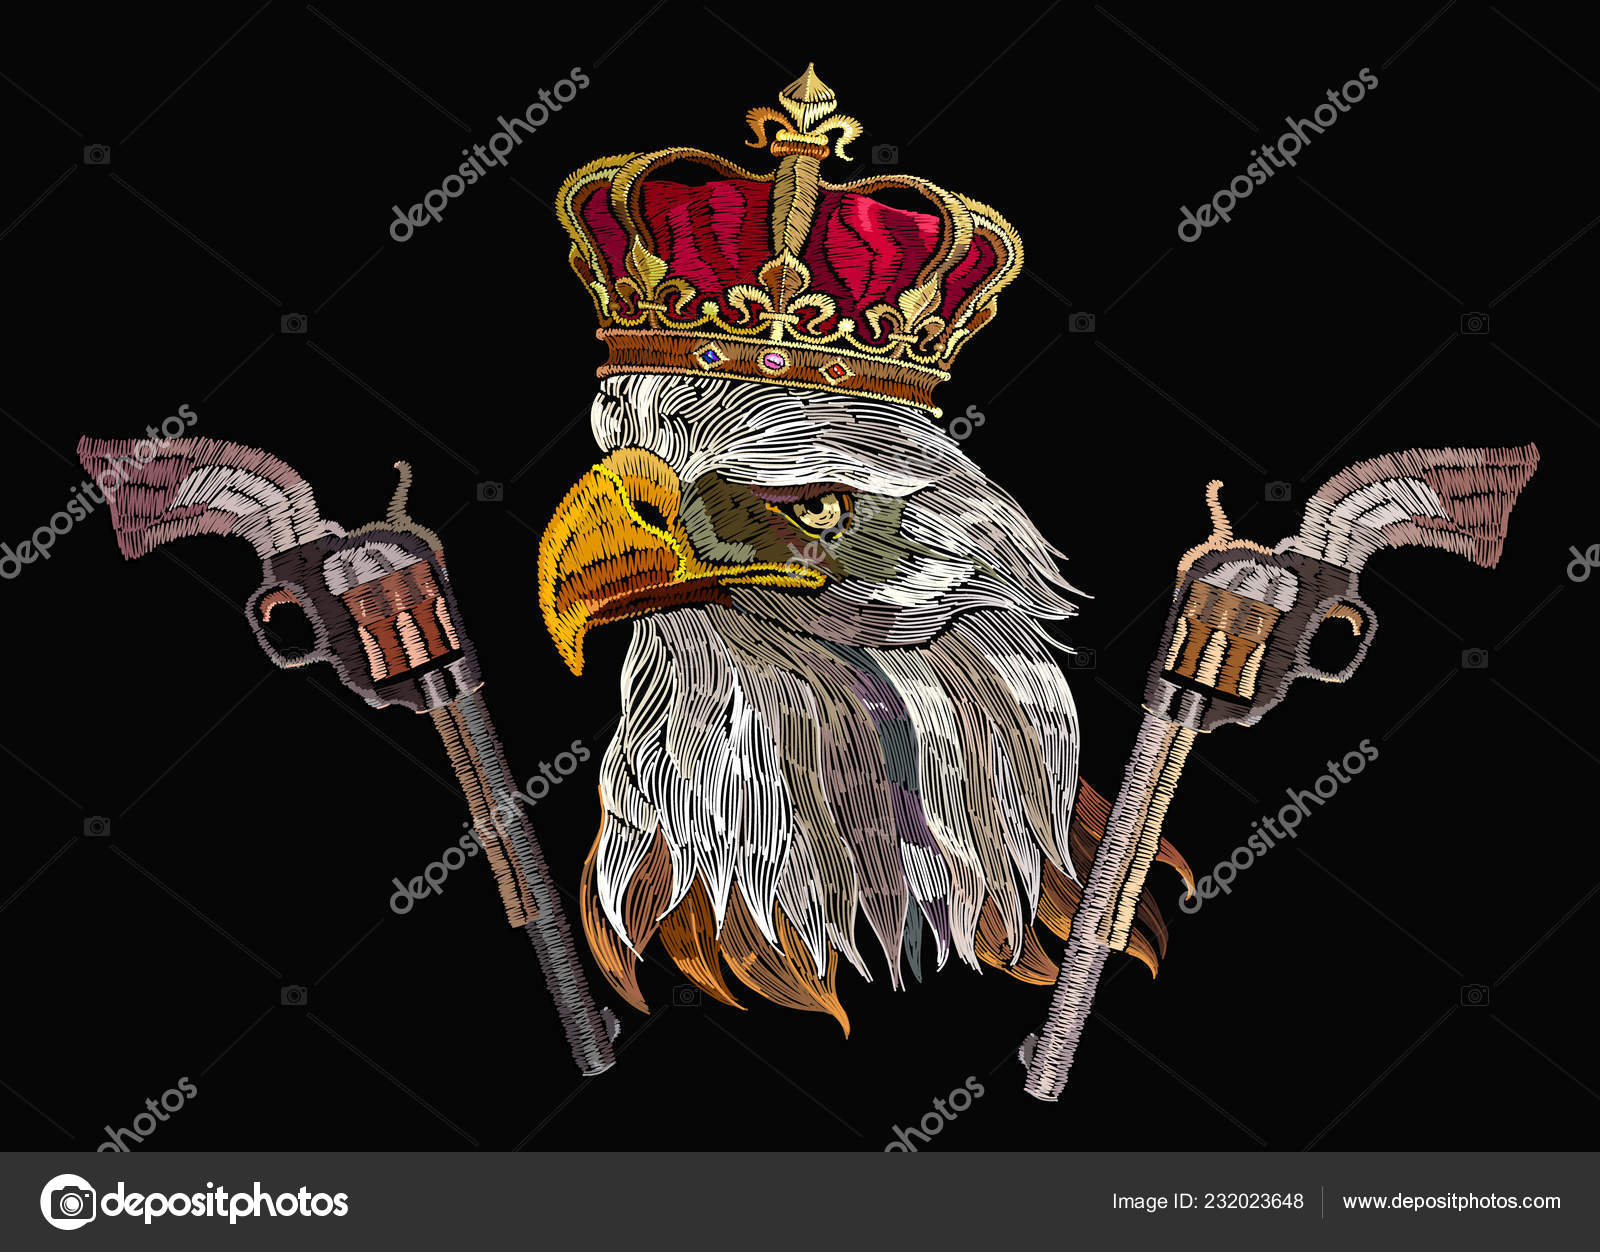 Set of heraldry eagle and crown design elements,black colored.ZIP... |  Heraldry, Eagle tattoos, Vector art